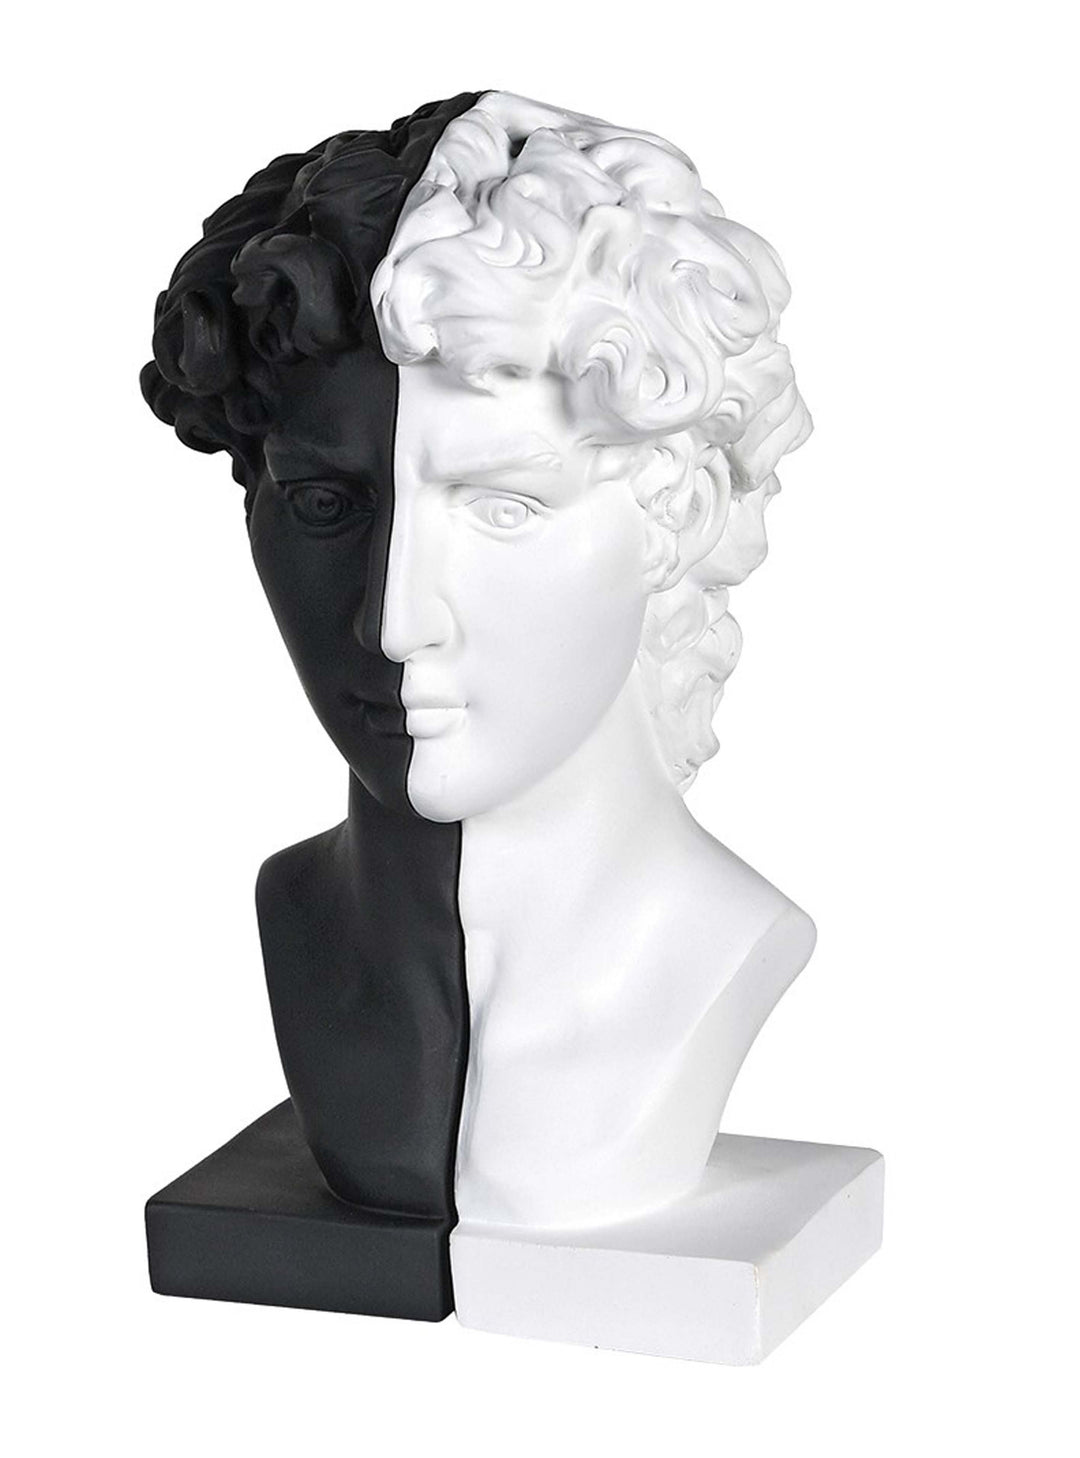 Male bust, bookends, black and white male head bookends